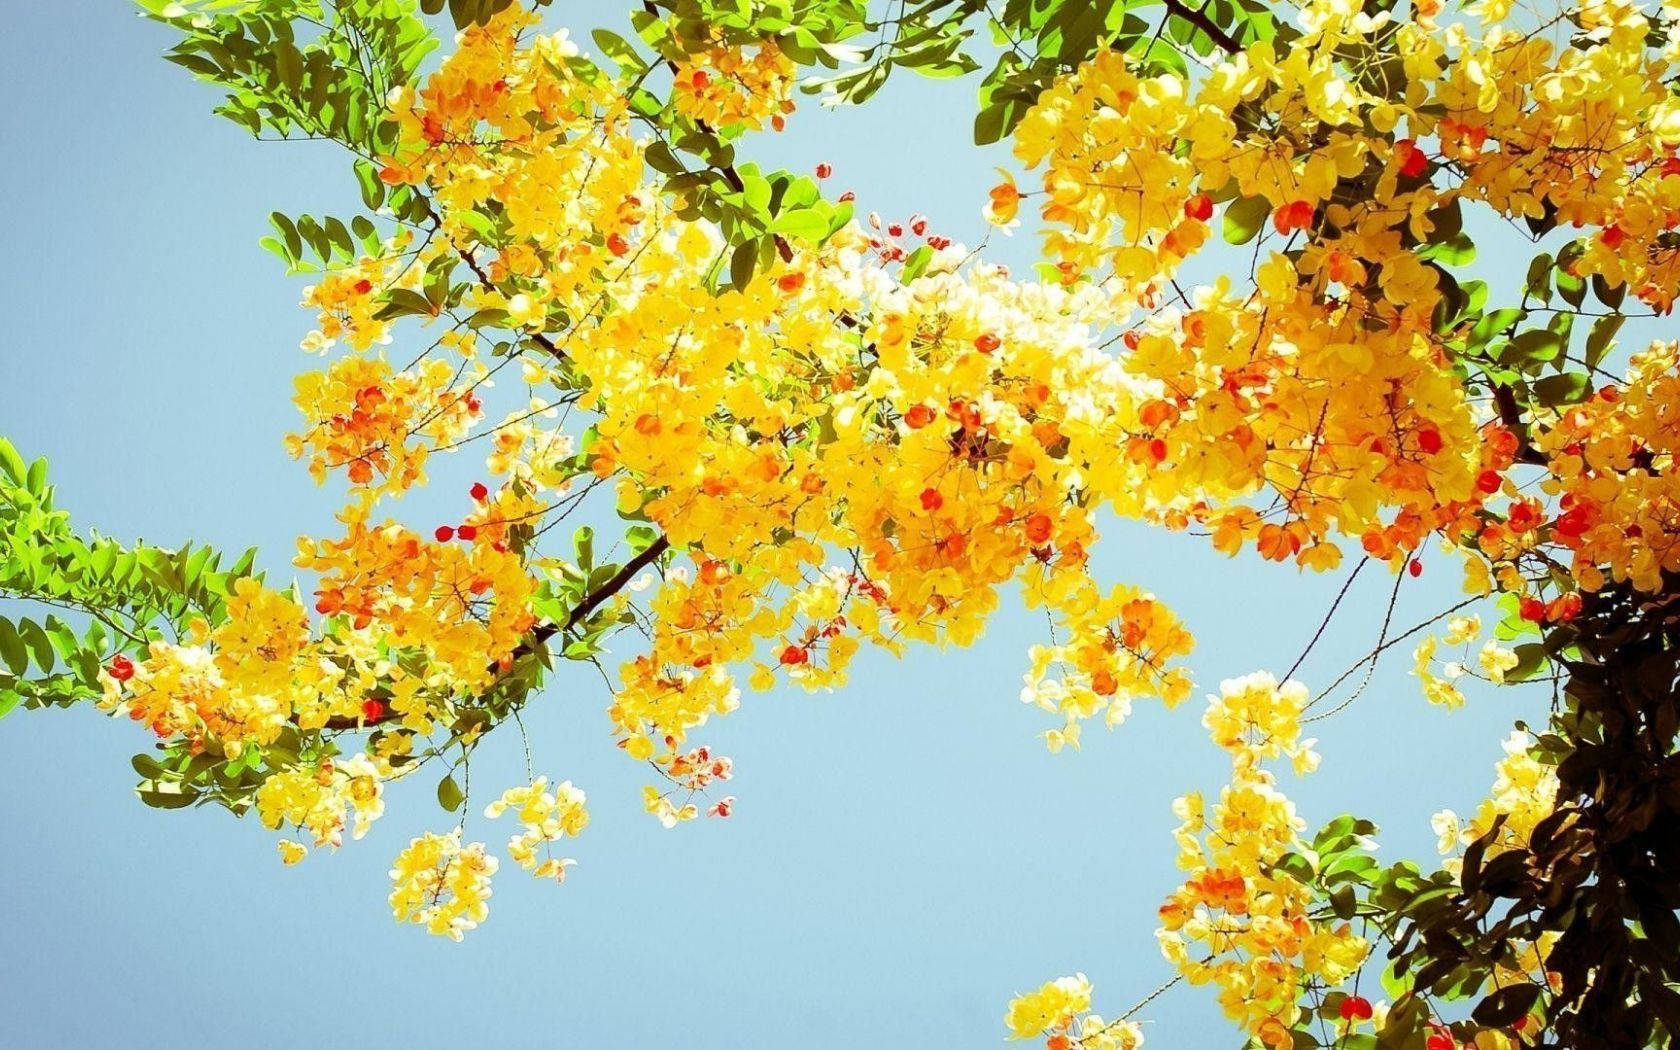 Nature Aesthetic Yellow Flowers On Tree For Computer Wallpaper